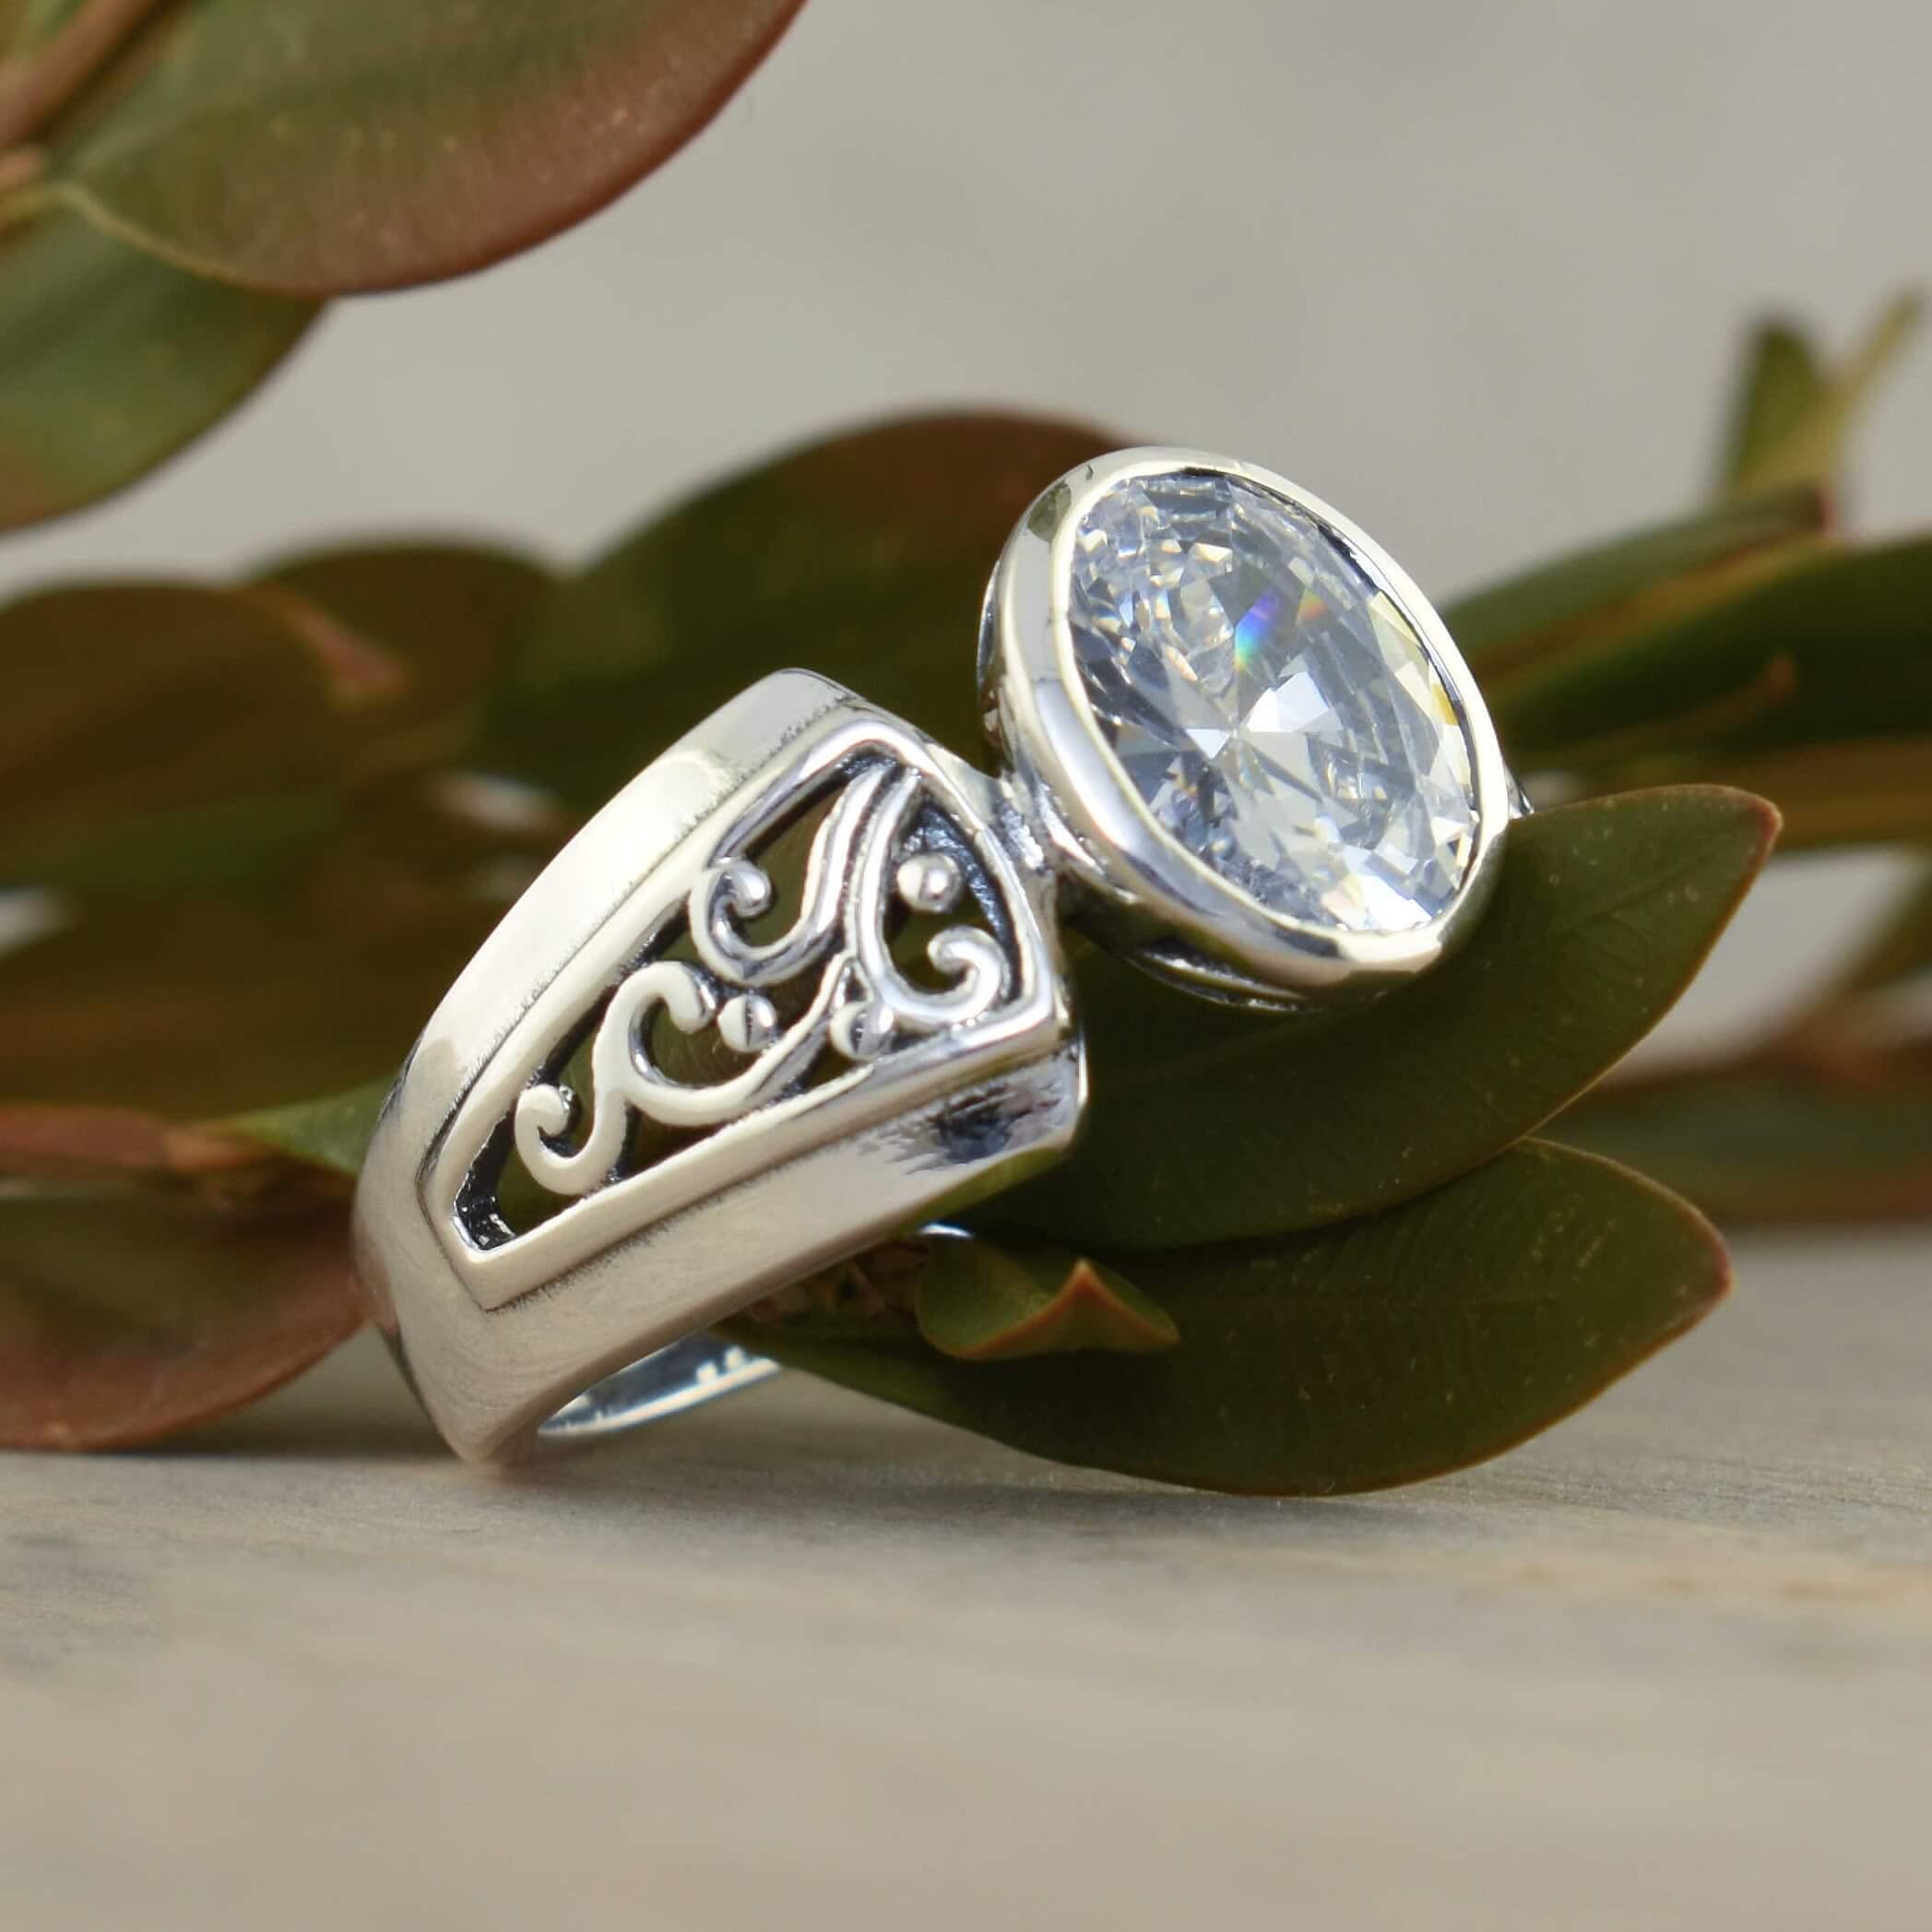 Cubic Zirconia bling stone in high polished sterling silver